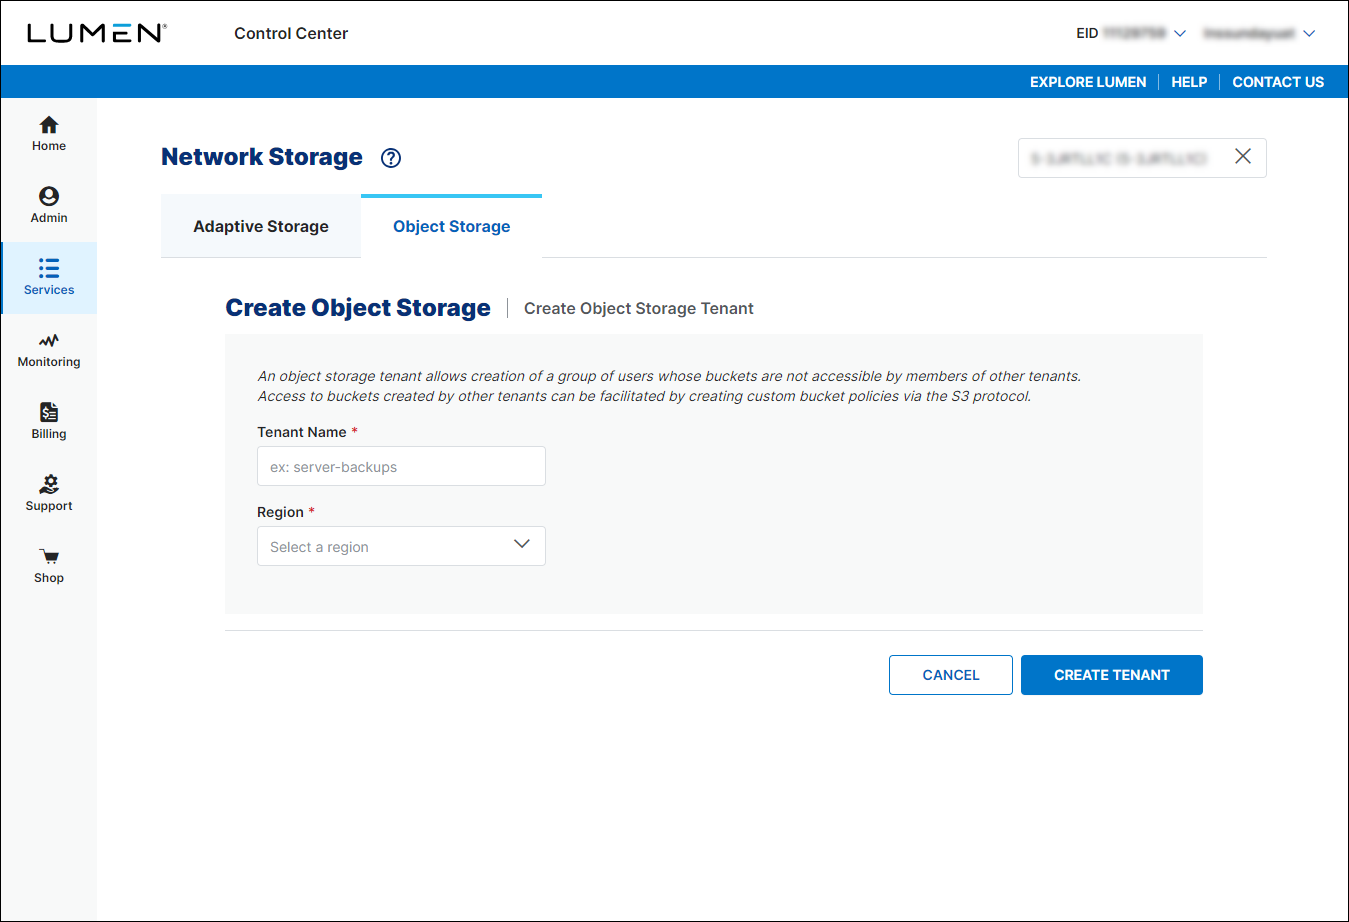 Object Storage (showing Create Tenant)